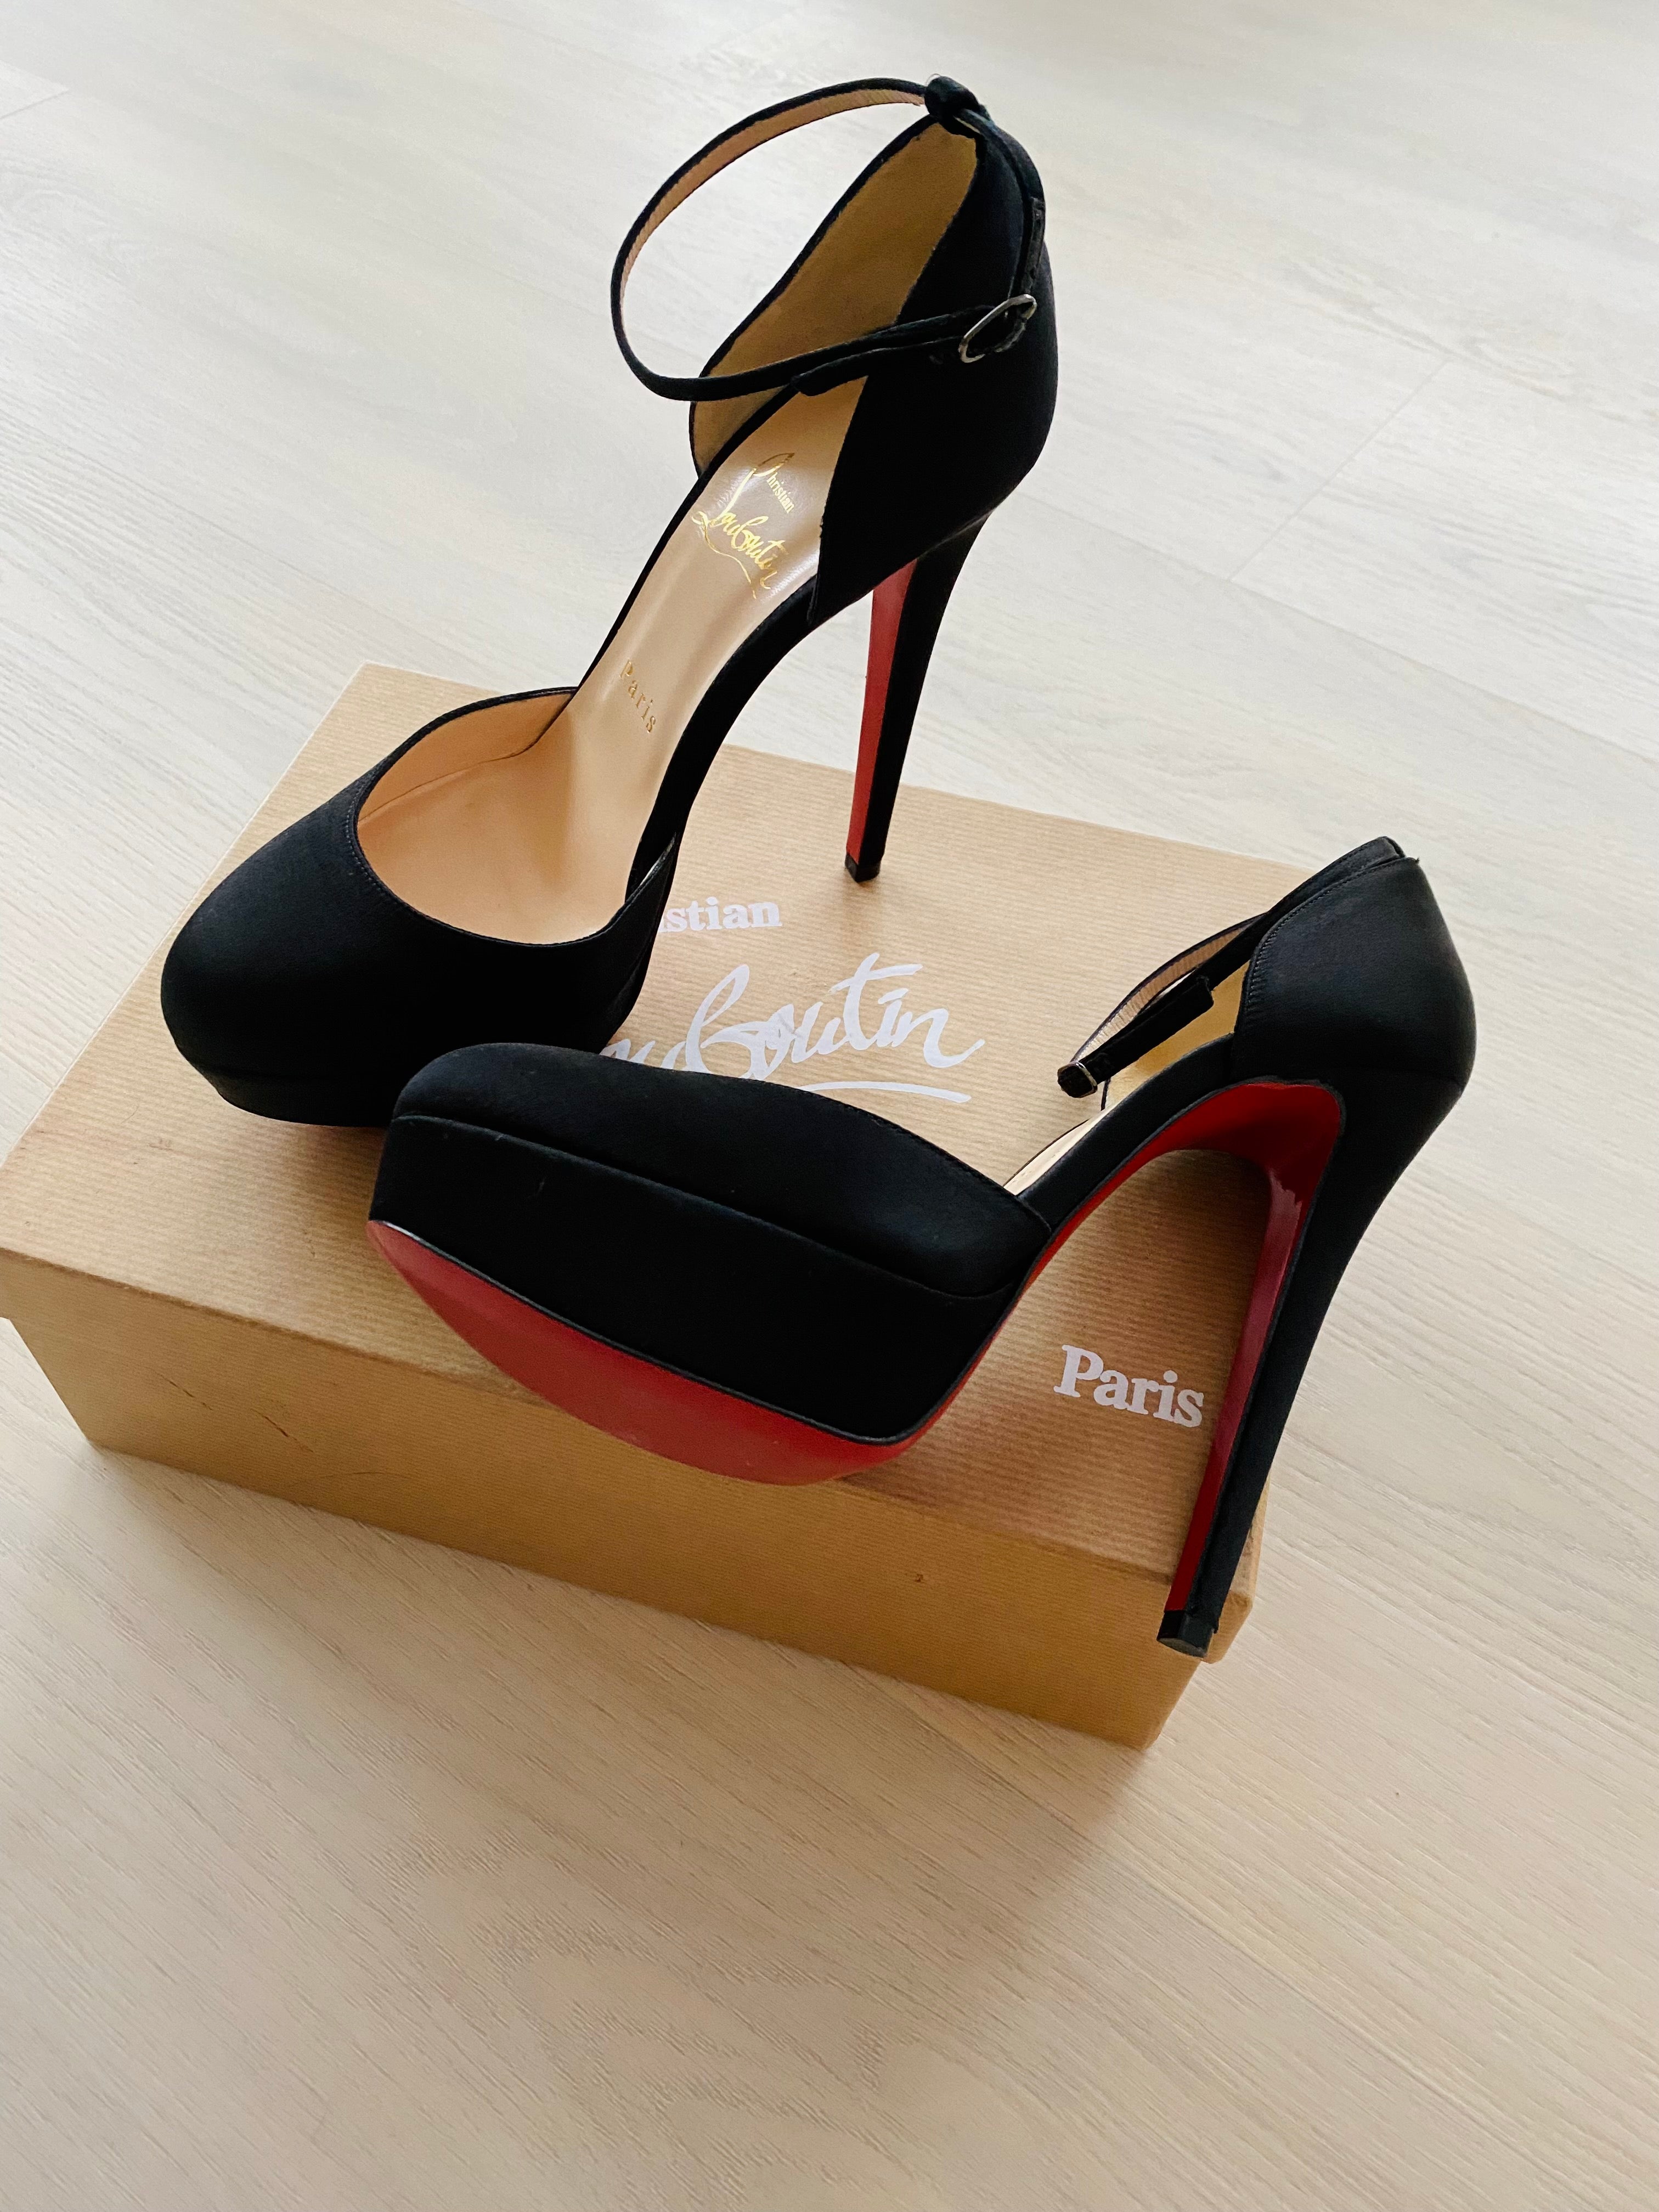 Christian Louboutin, Shoes, Christian Louboutin Shoes Price Is Firm